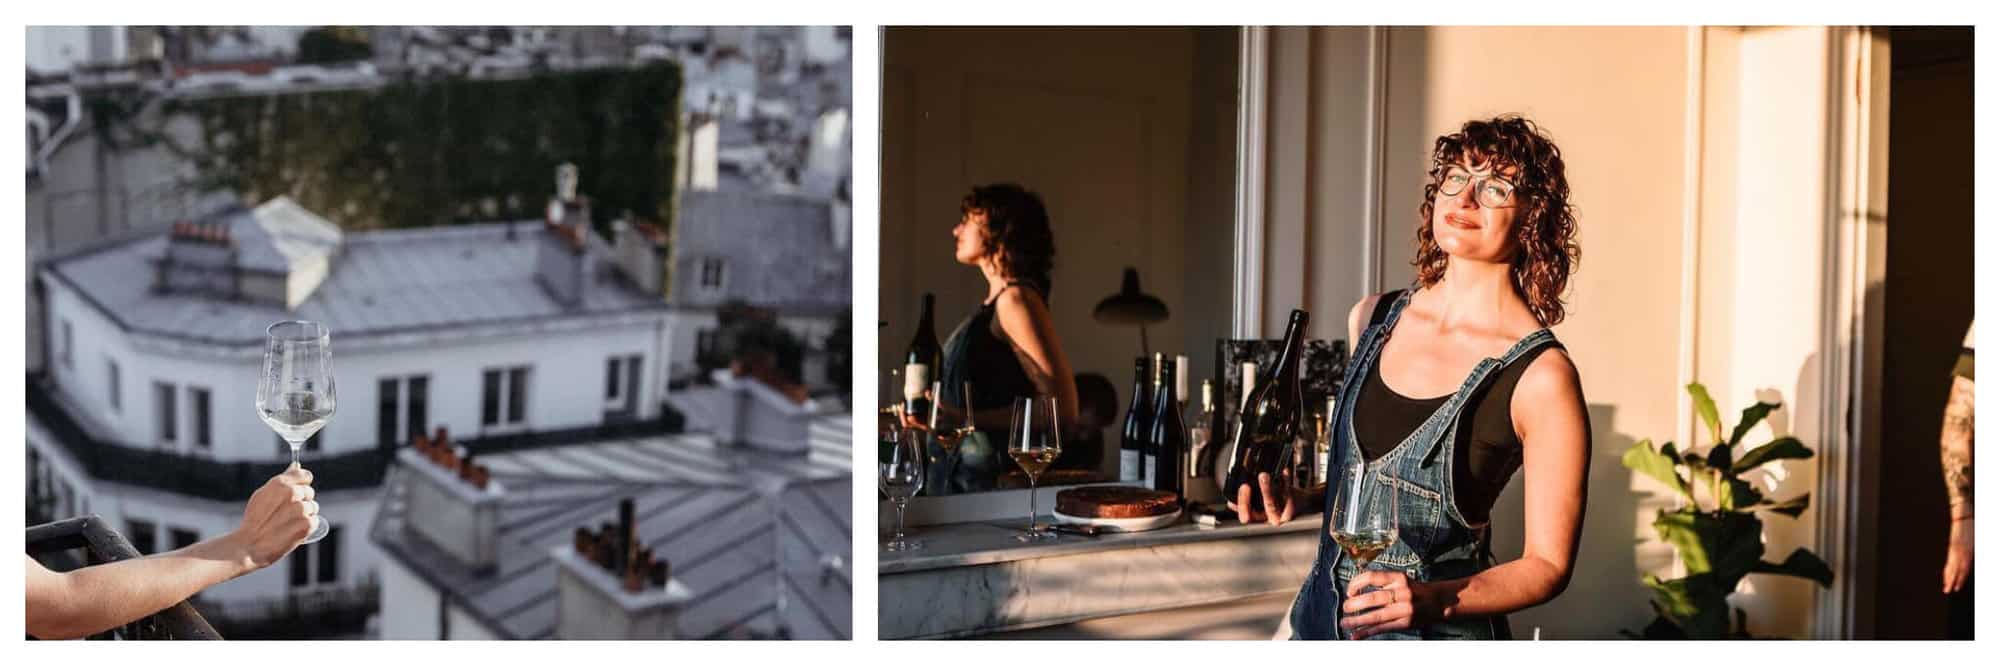 Left: an arm and hand holding a glass of out of a window in Paris. Gray slate Parisian roofs and other buildings can be seen. Right: A woman standing in an apartment in Paris with a glass of wine in her hand. She has short brown hair and is wearing jean overalls.